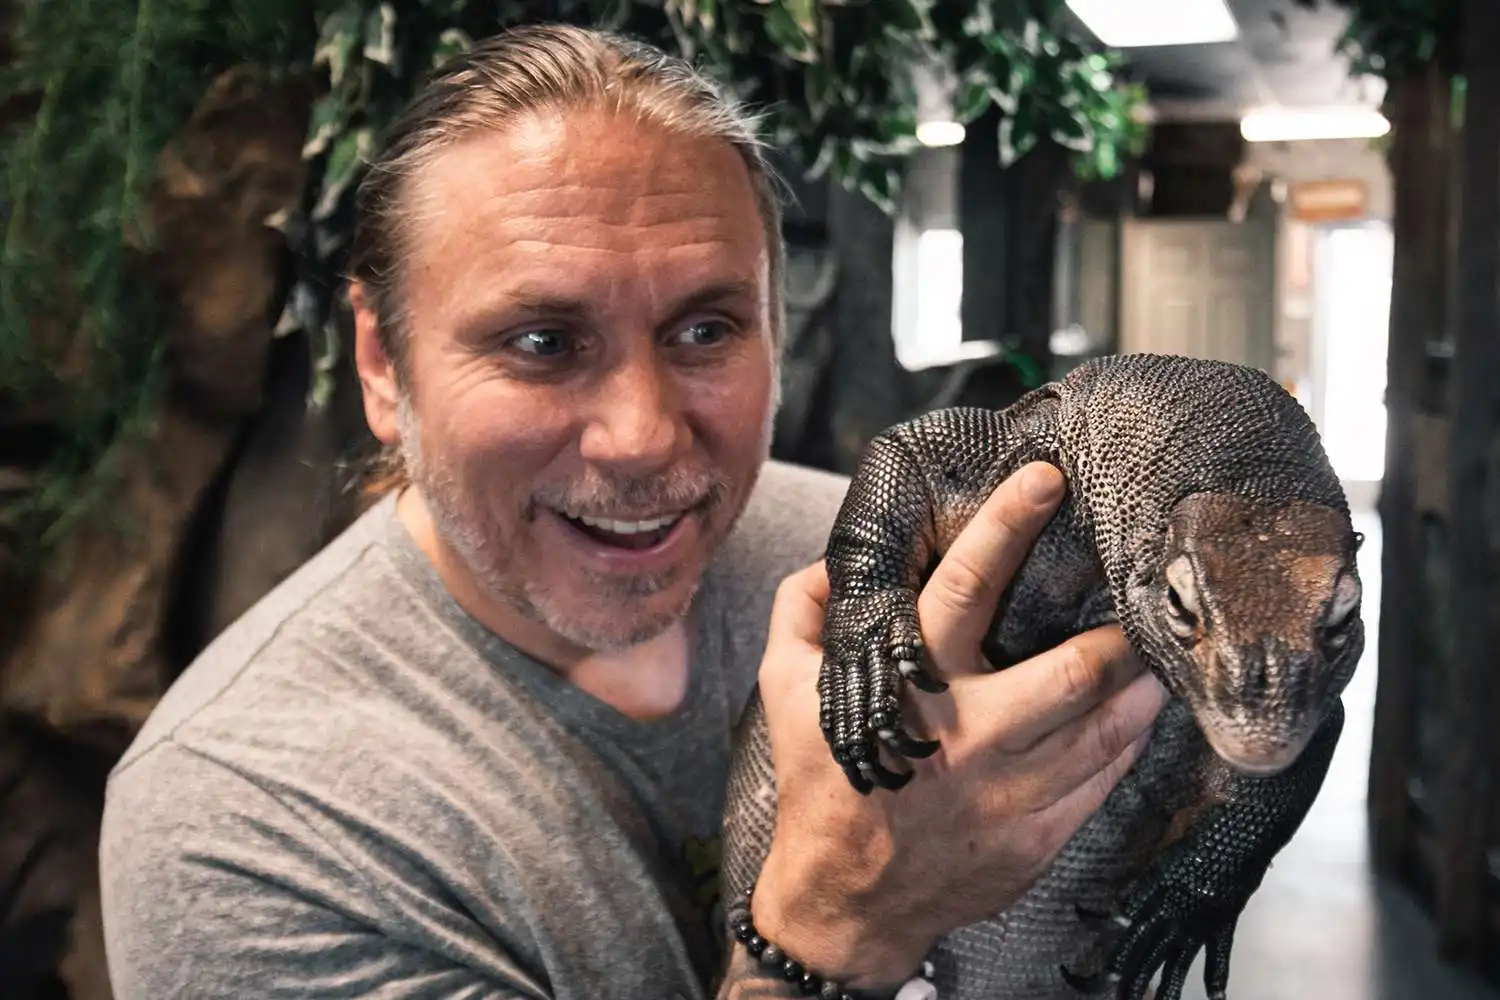 Popular TikTok Reptile Expert Brian Barczyk Dies at 54 from Pancreatic Cancer